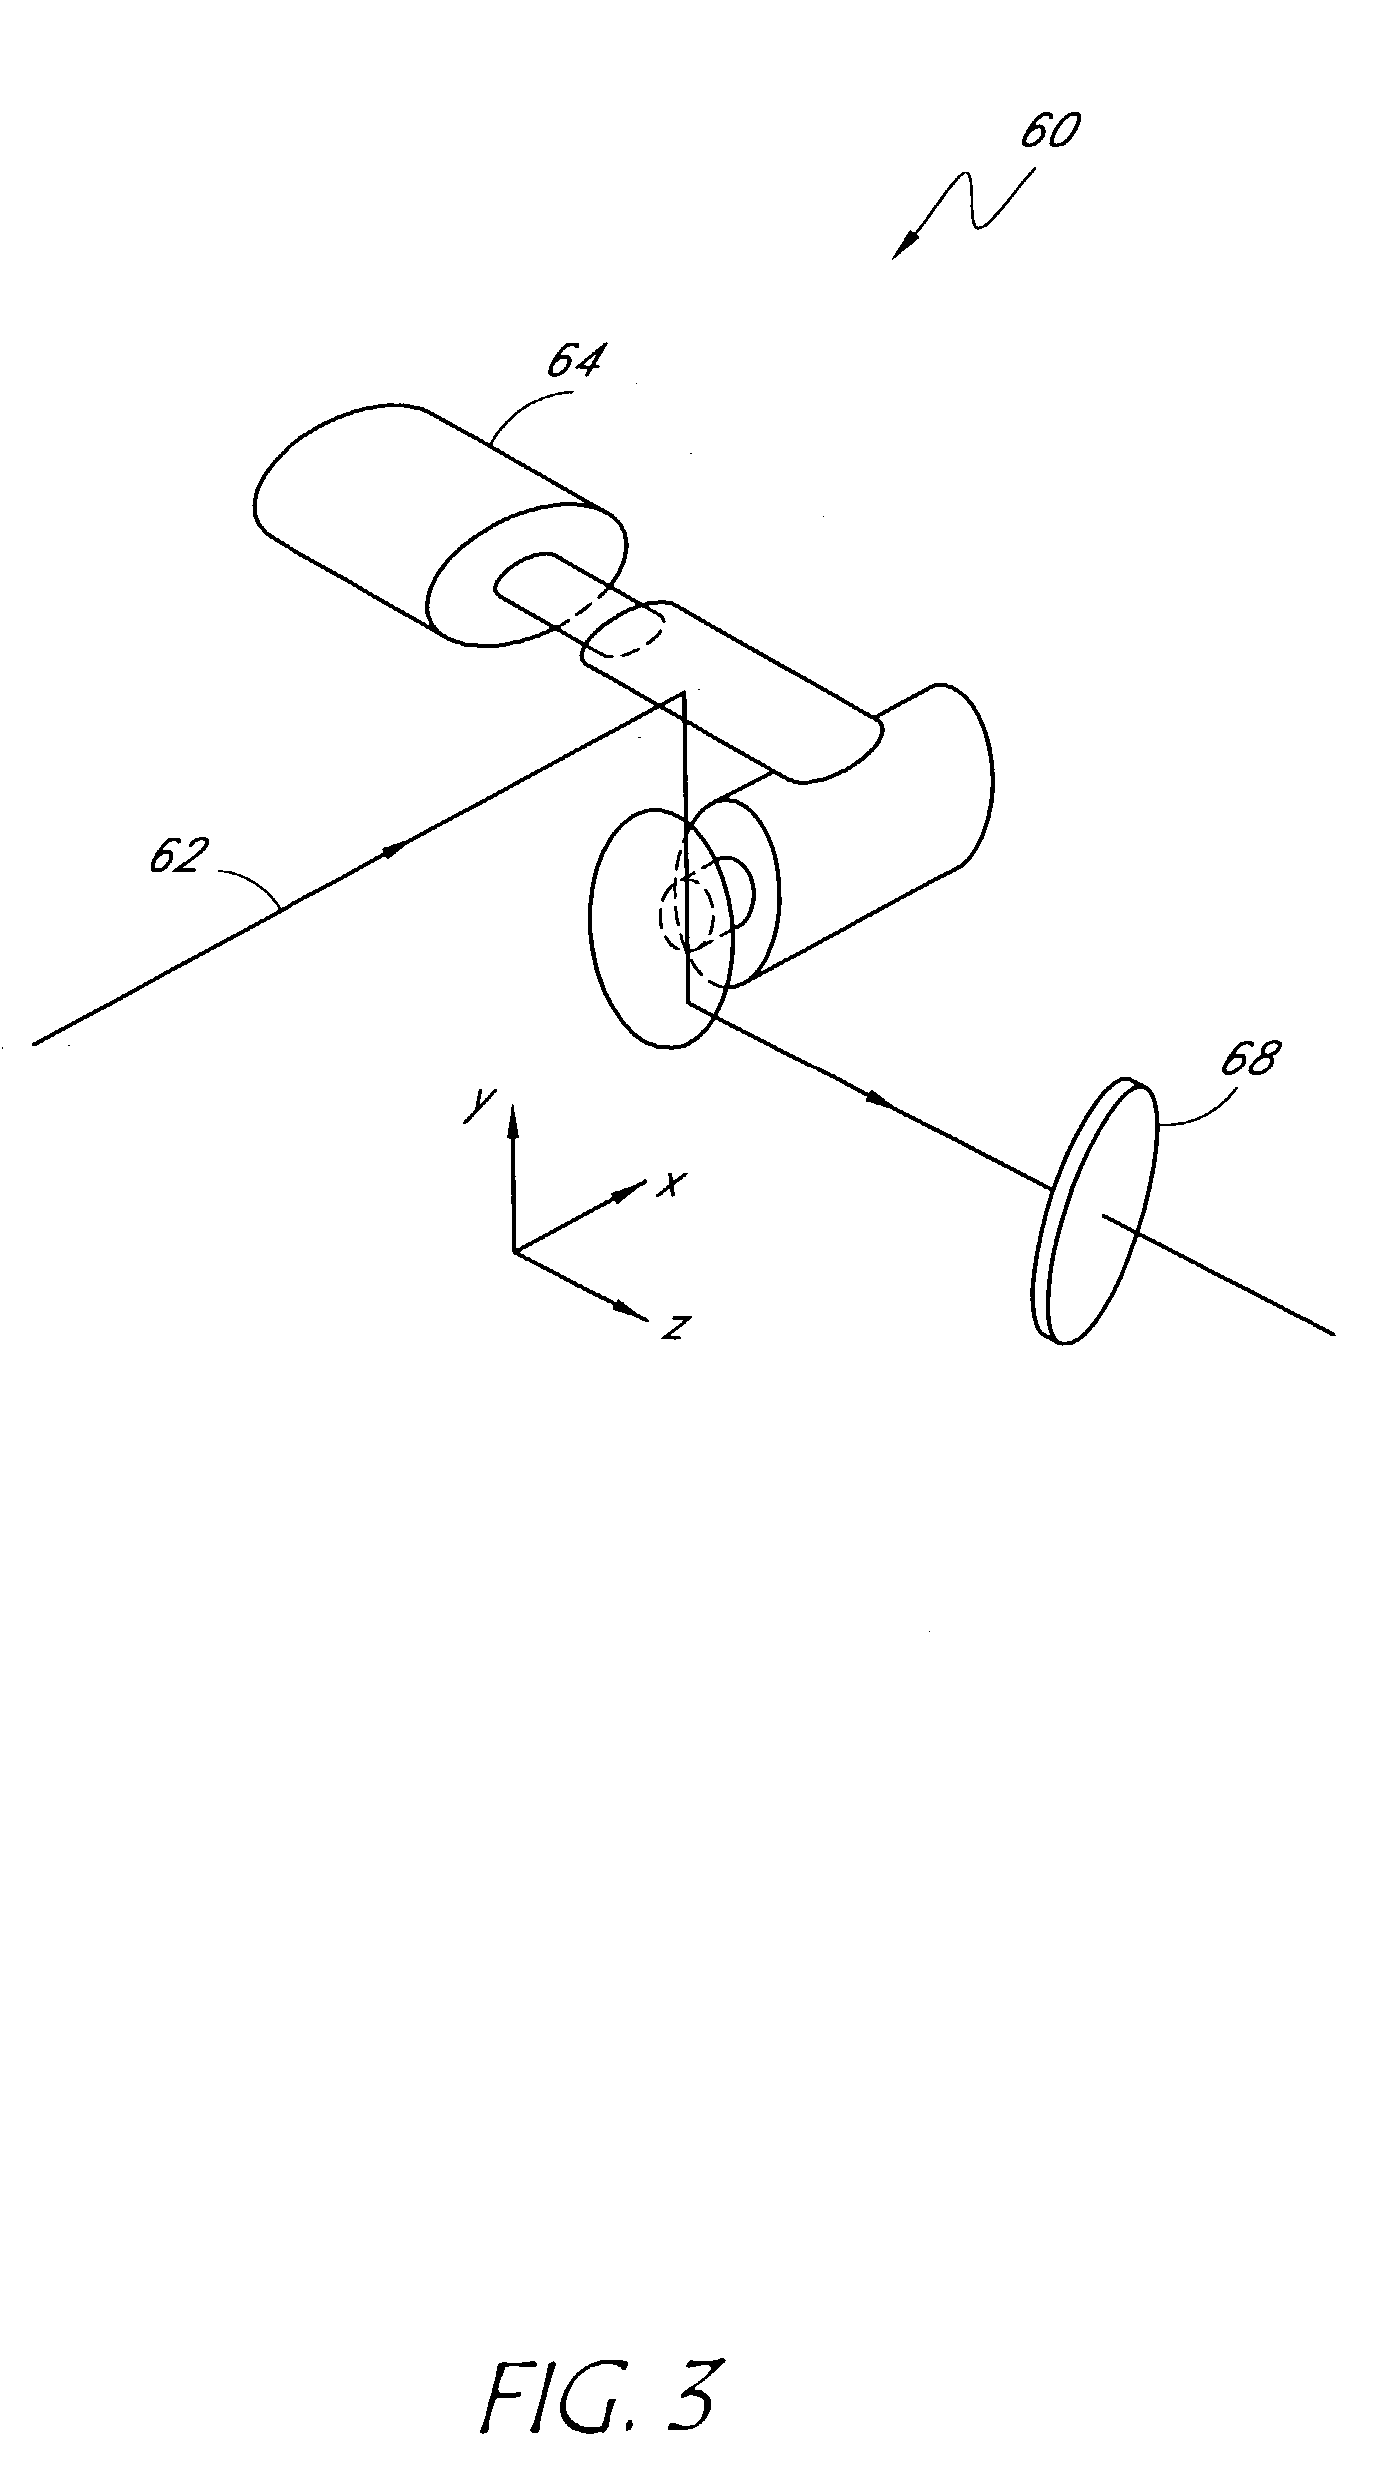 Apparatus and method of fabricating a compensating element for wavefront correction using spatially localized curing of resin mixtures